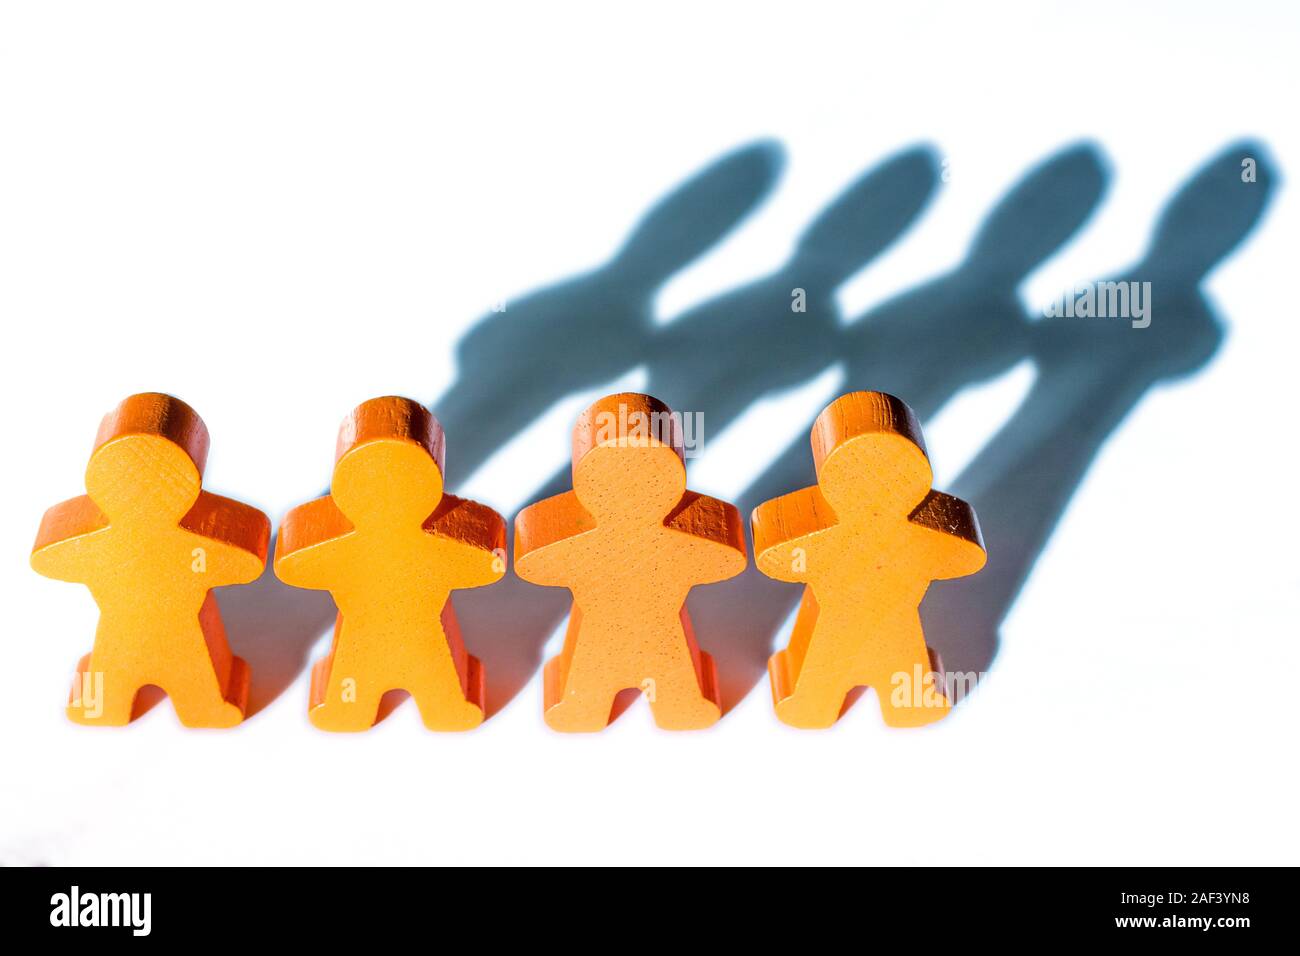 Background of a human chain of wooden figures on cohesion Stock Photo